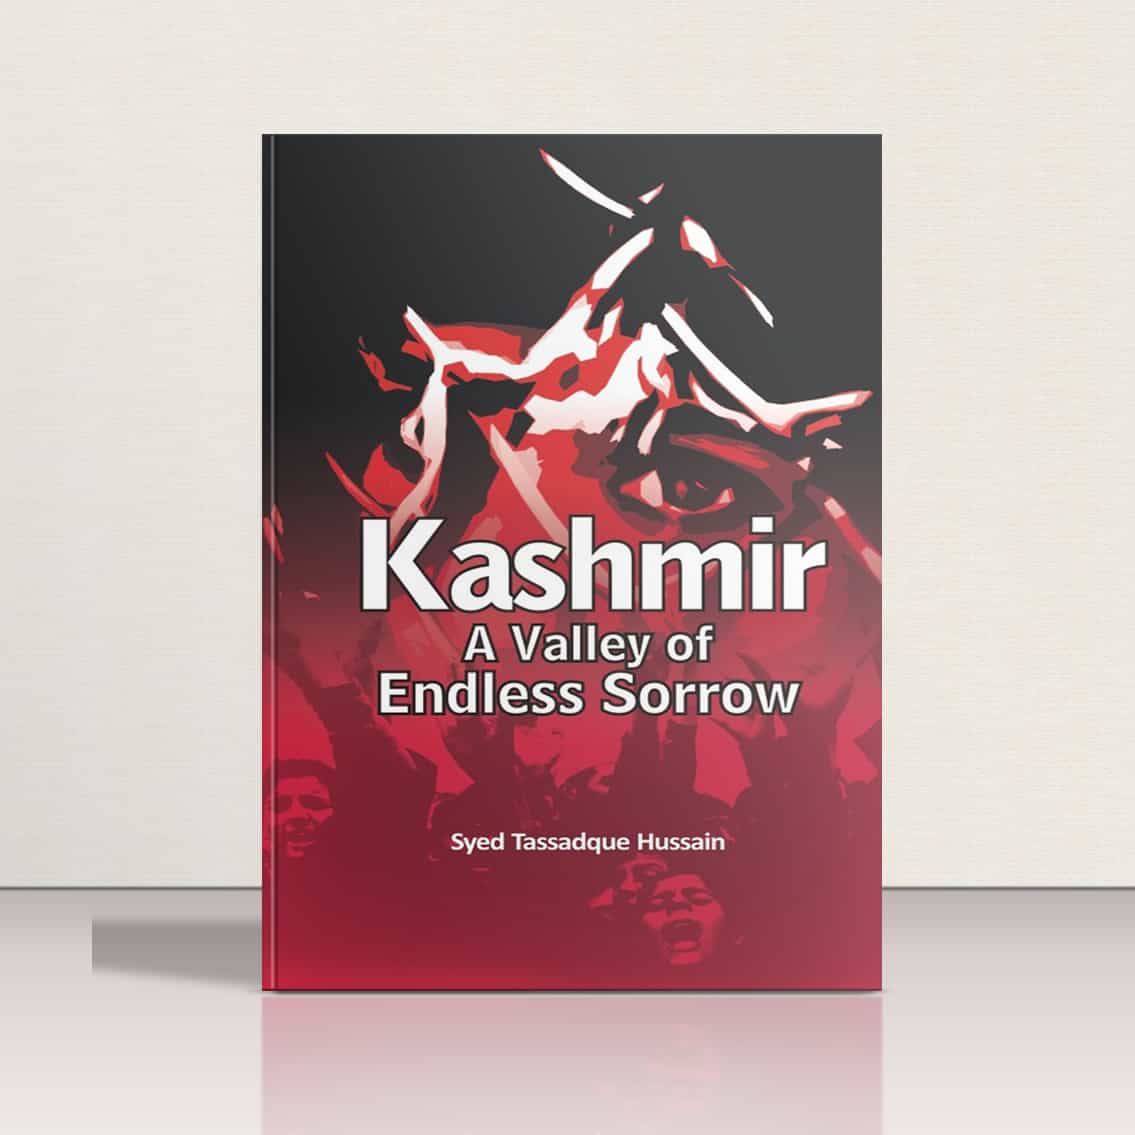 Kashmir-A Valley of Endless Sorrow by Syed Tassadque Hussain